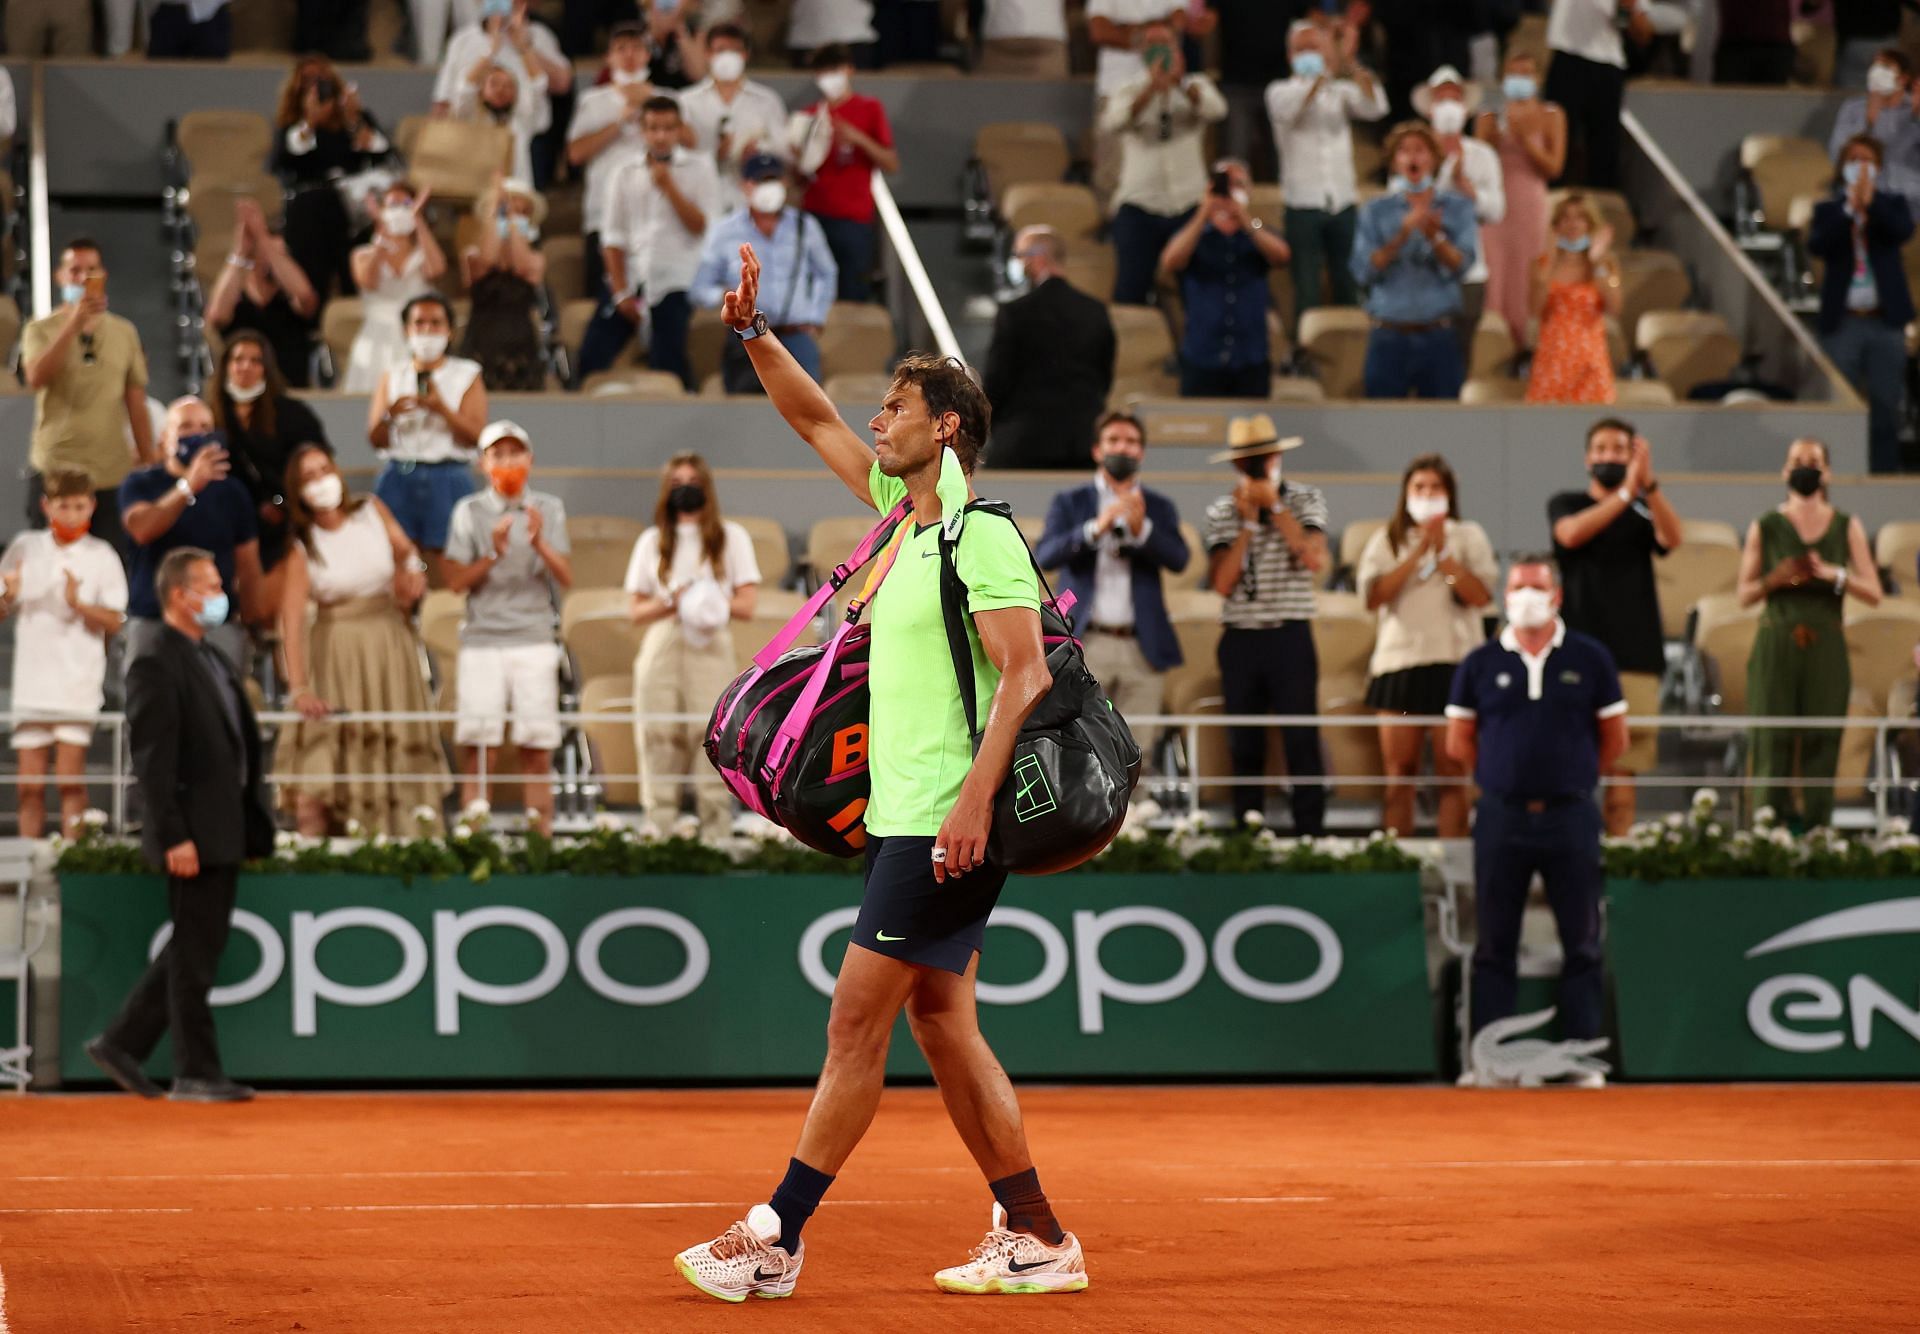 Roland Garros unveiled a statue of Rafael Nadal to honor his 13 titles there